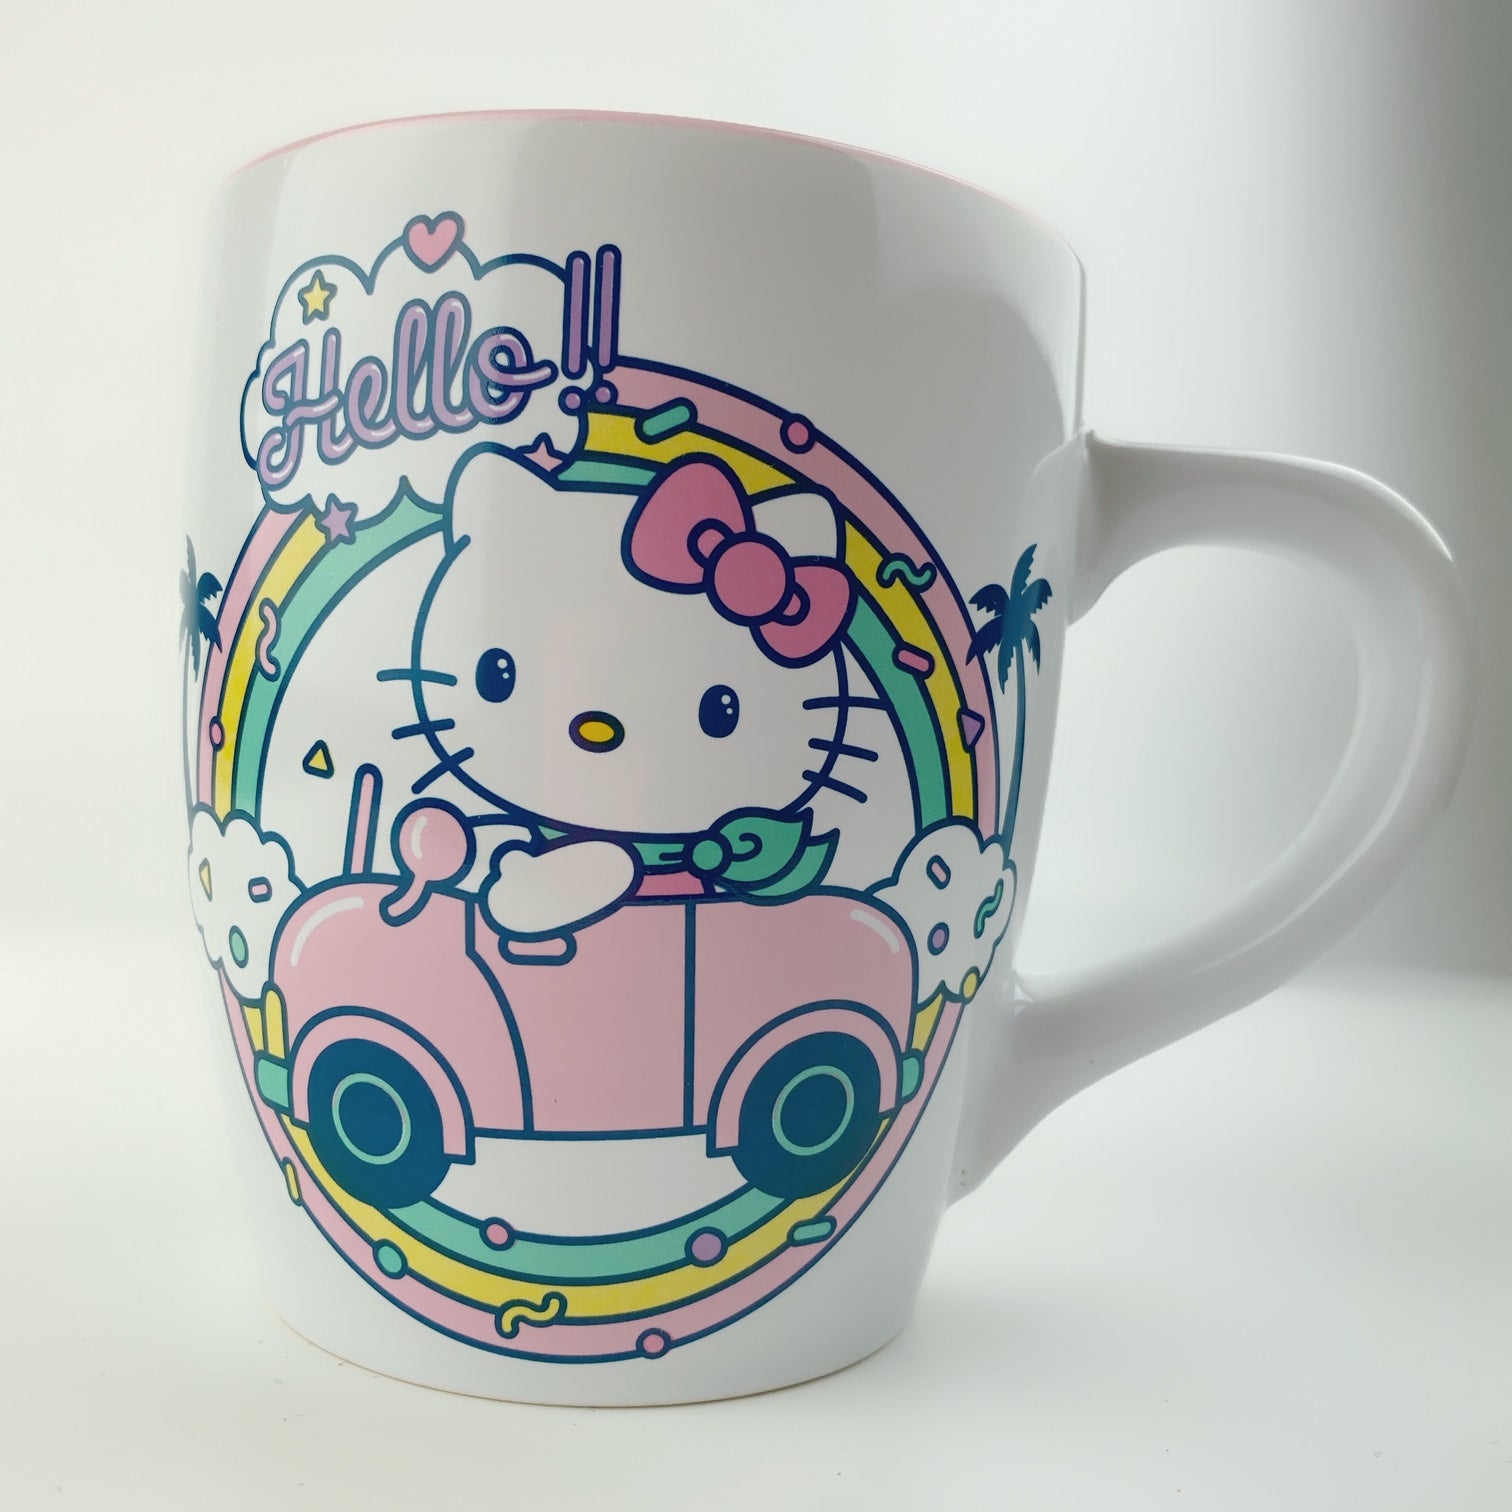 Hello Kitty Cup | Hello Kitty Cups | Hello Kitty Iced Coffee Cup | Iced  Coffee Cup | Trendy Iced Coffee Cup